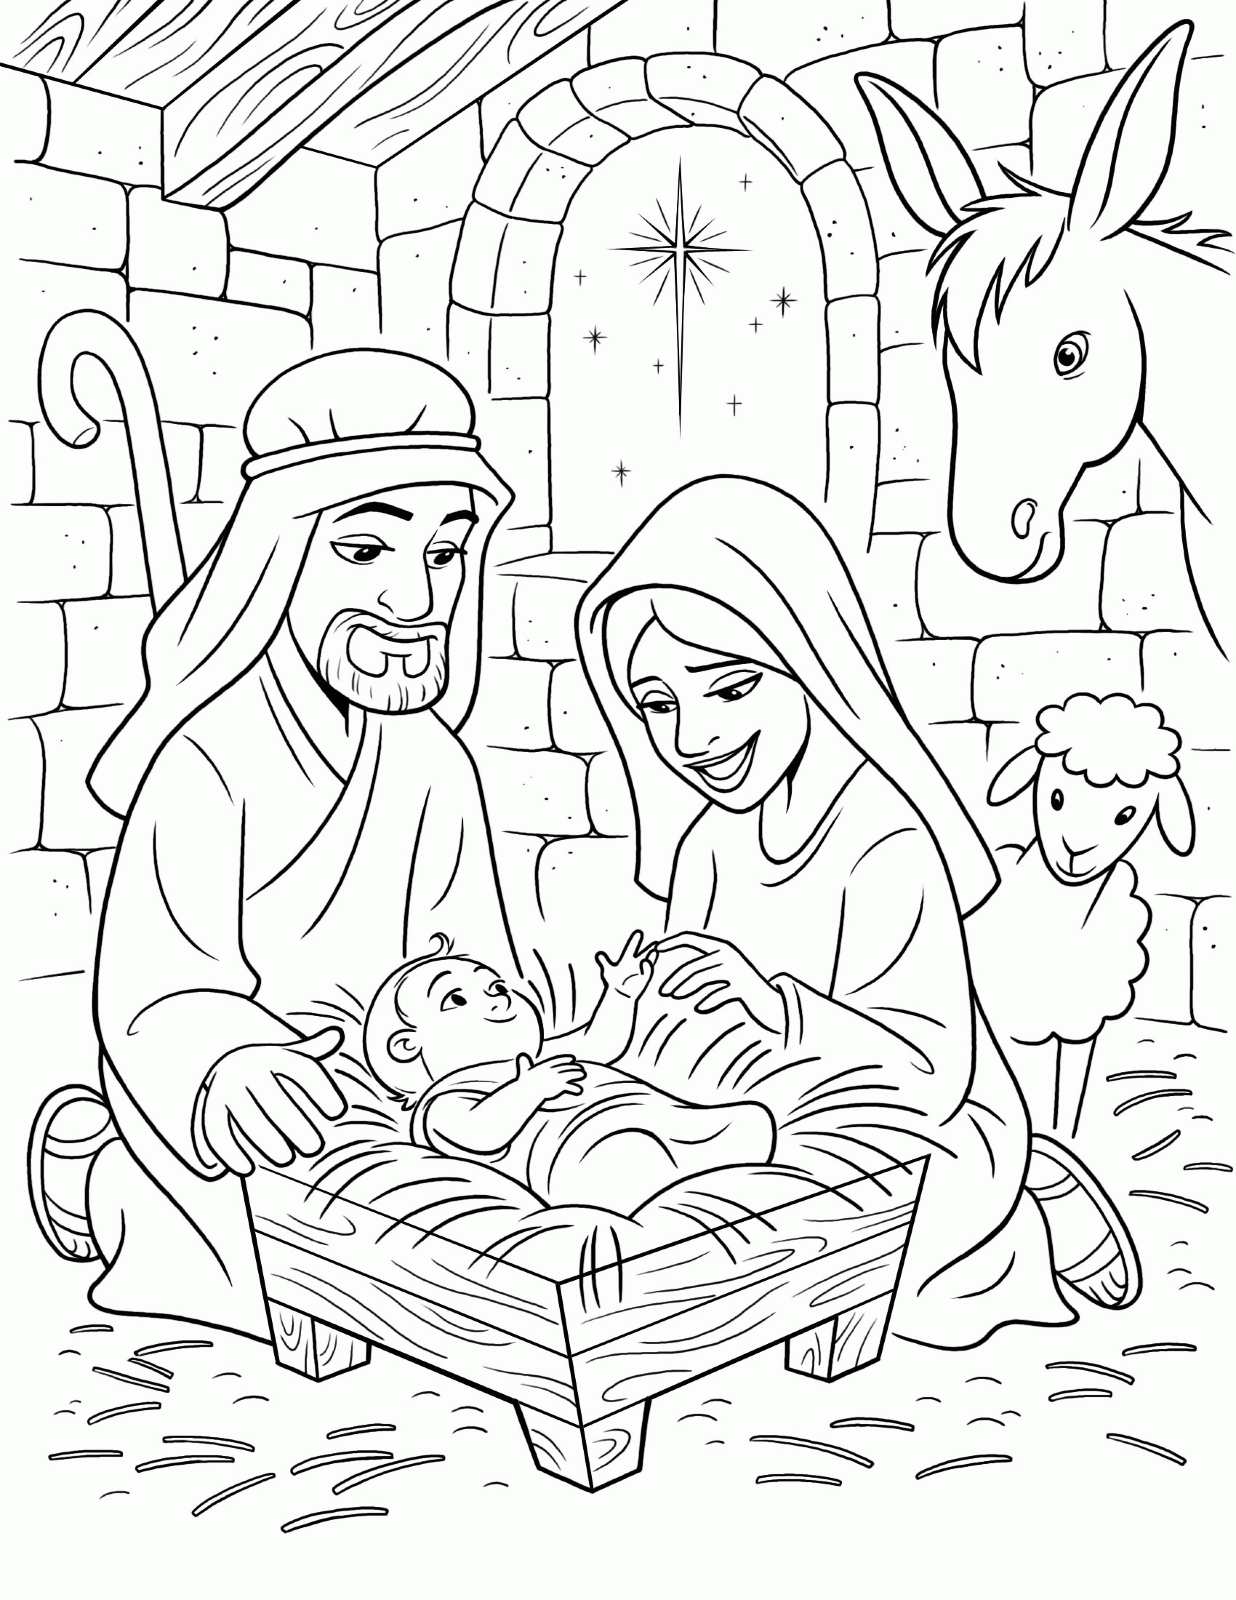 Download The Birth Of Jesus Coloring Page - Coloring Home